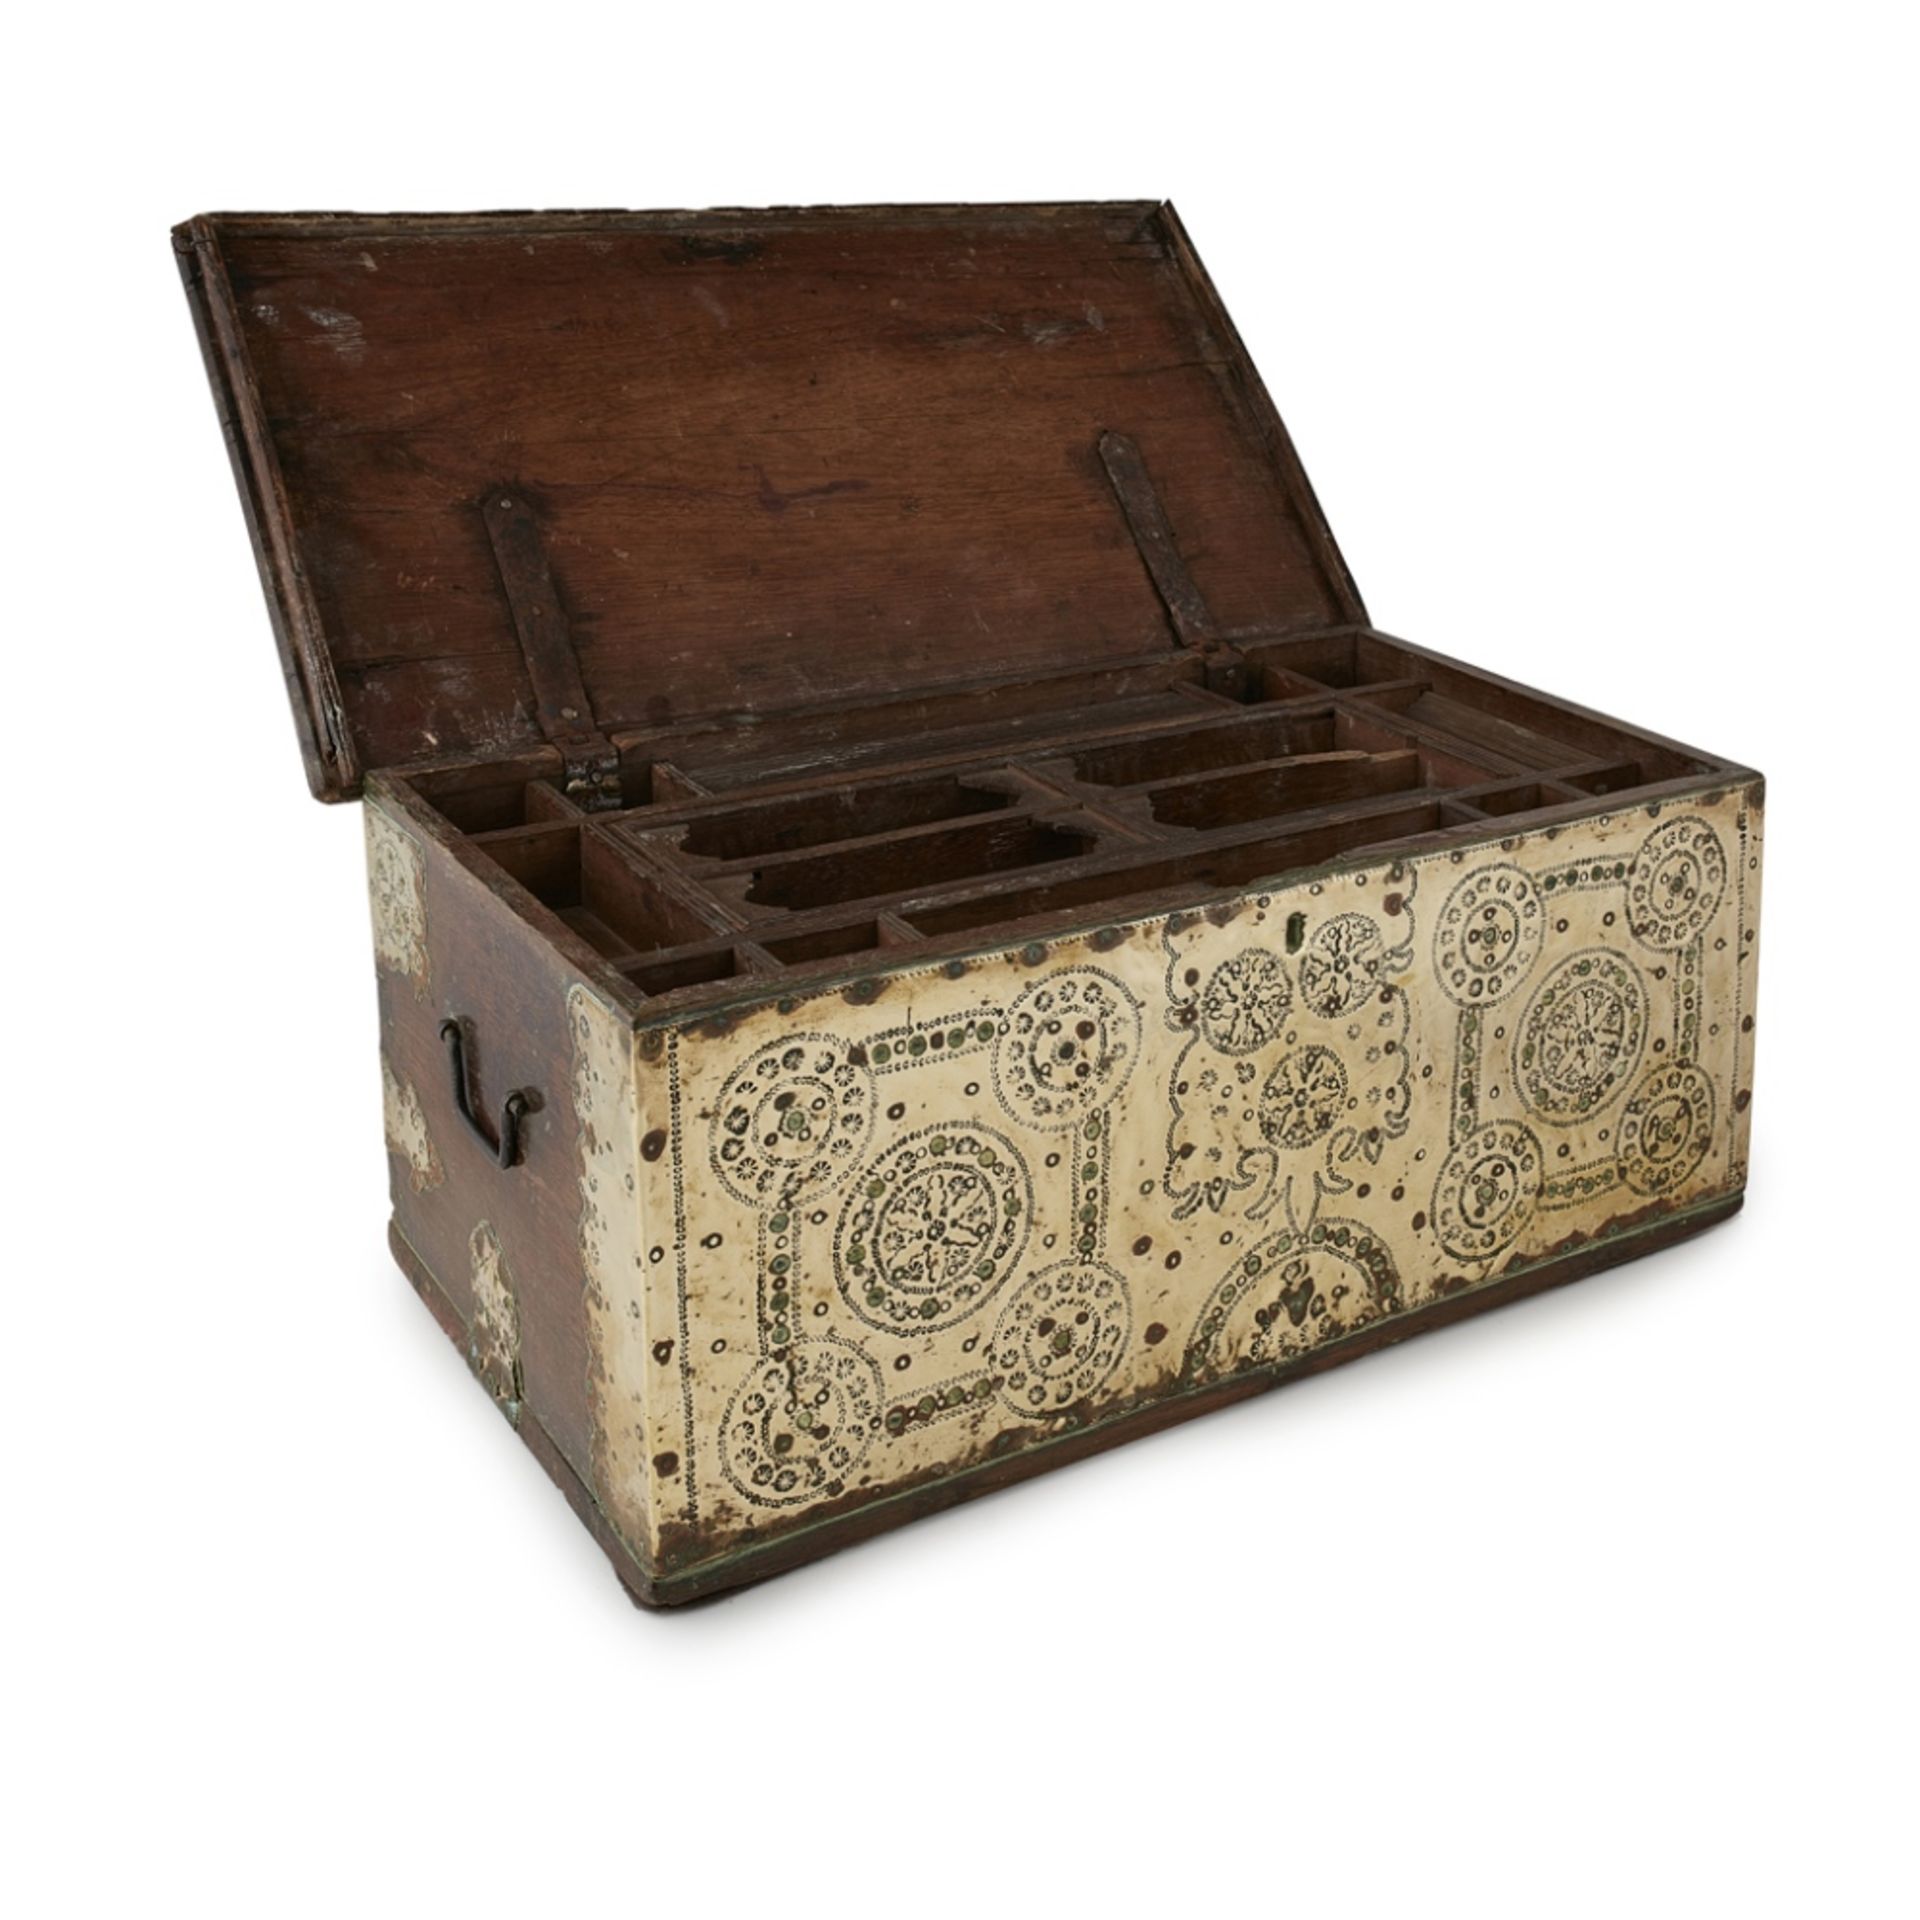 INDIAN BRASS AND PADOUK WORK BOX19TH CENTURY the hinged top and front panel covered in punch - Image 2 of 2